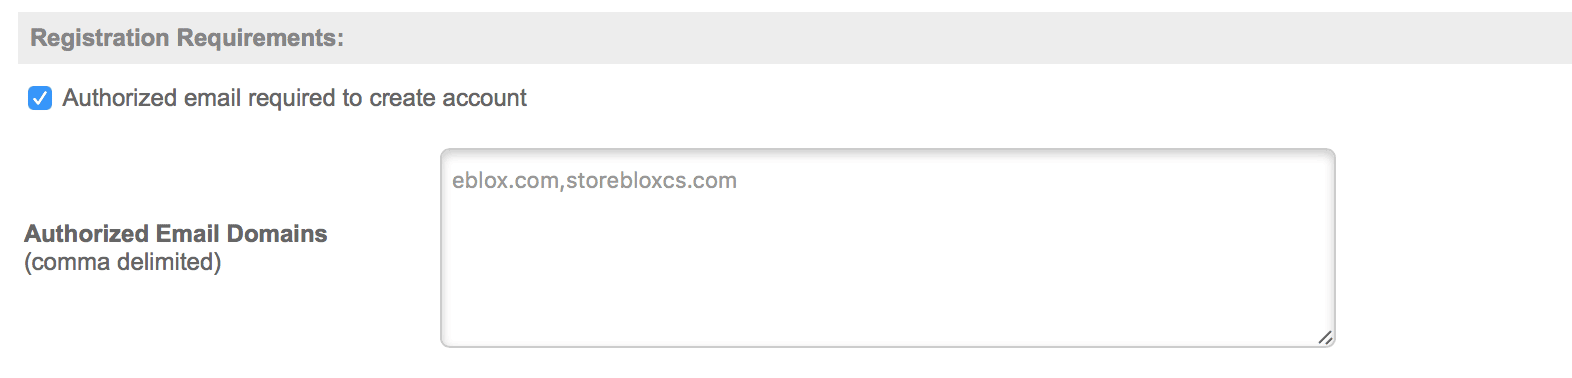 Controlling registration in a storeBlox CS Company Store with email domains